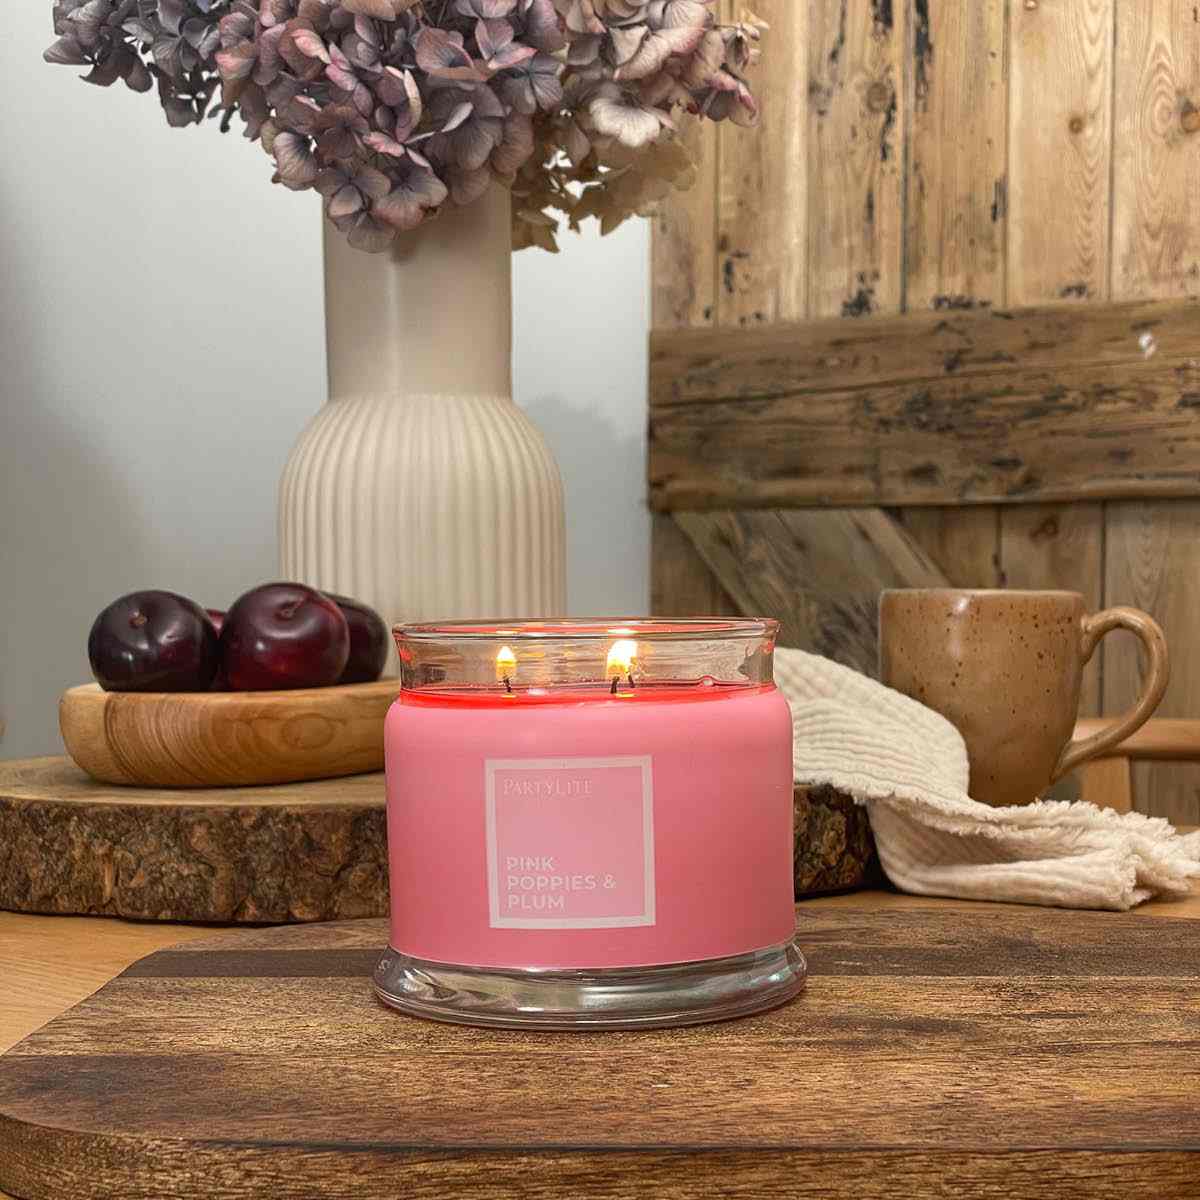 Pink Poppies & Plum 3-Wick Jar Candle - PartyLite US